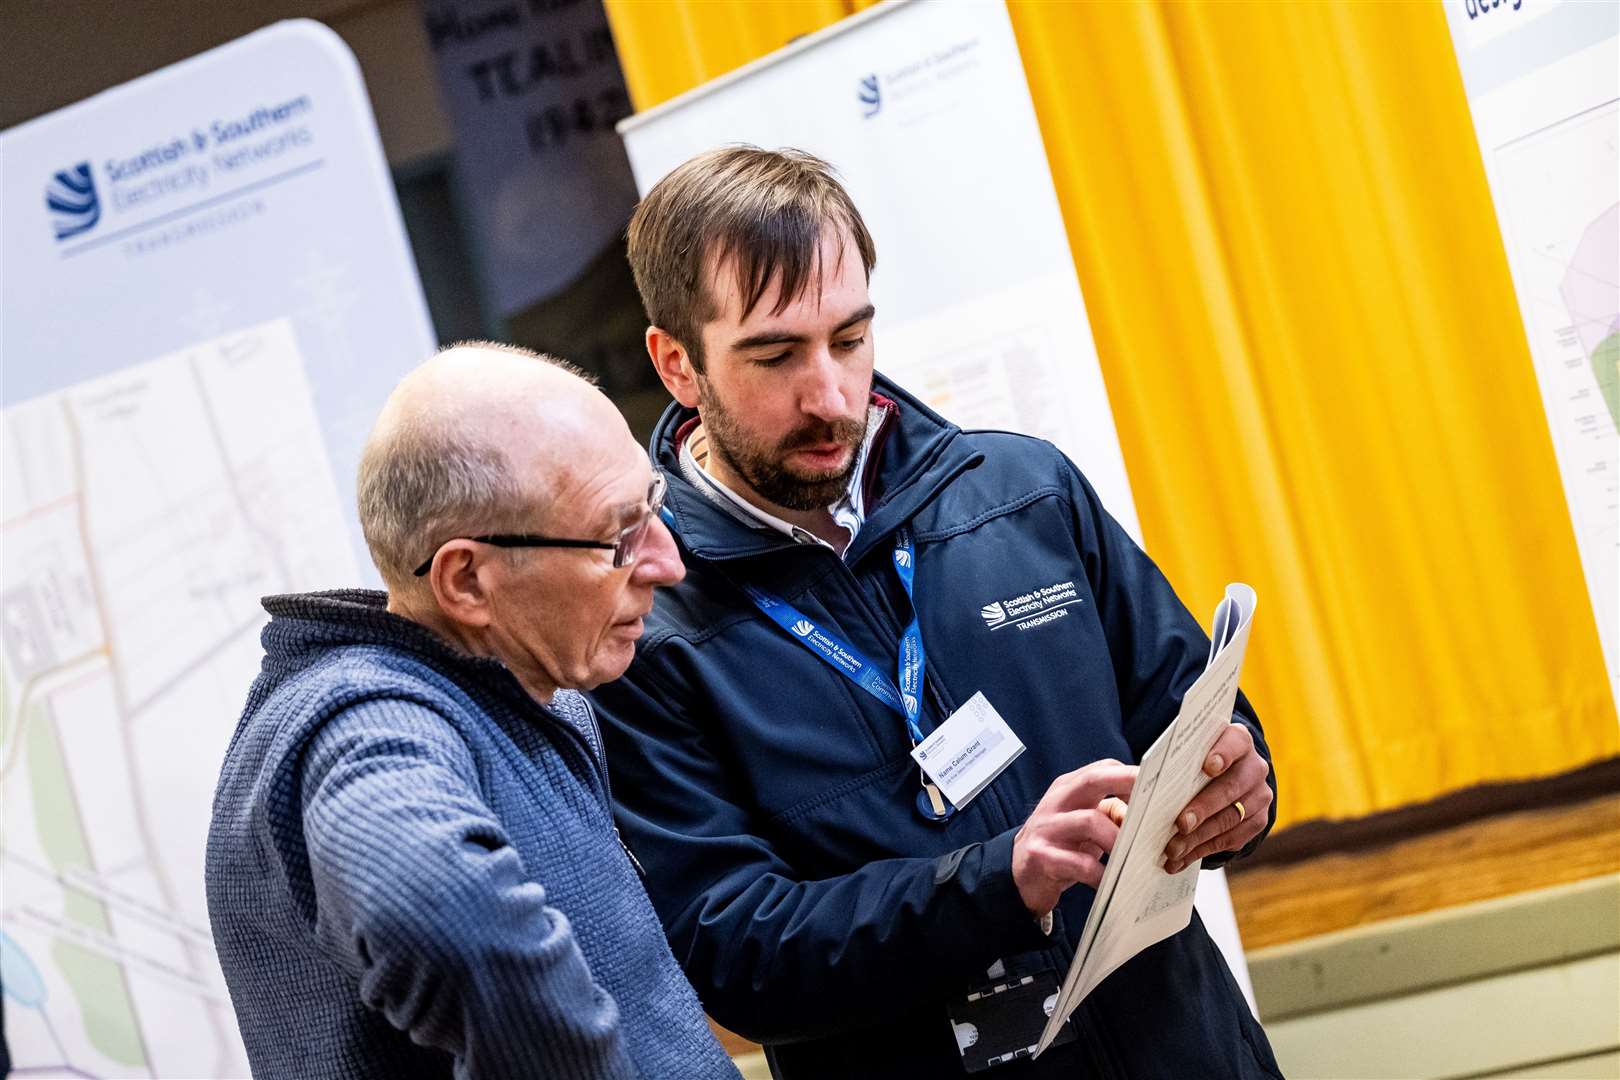 SSEN Transmission is planning a new round of public engagement and pre-application consultation events, including three sessions in Caithness.